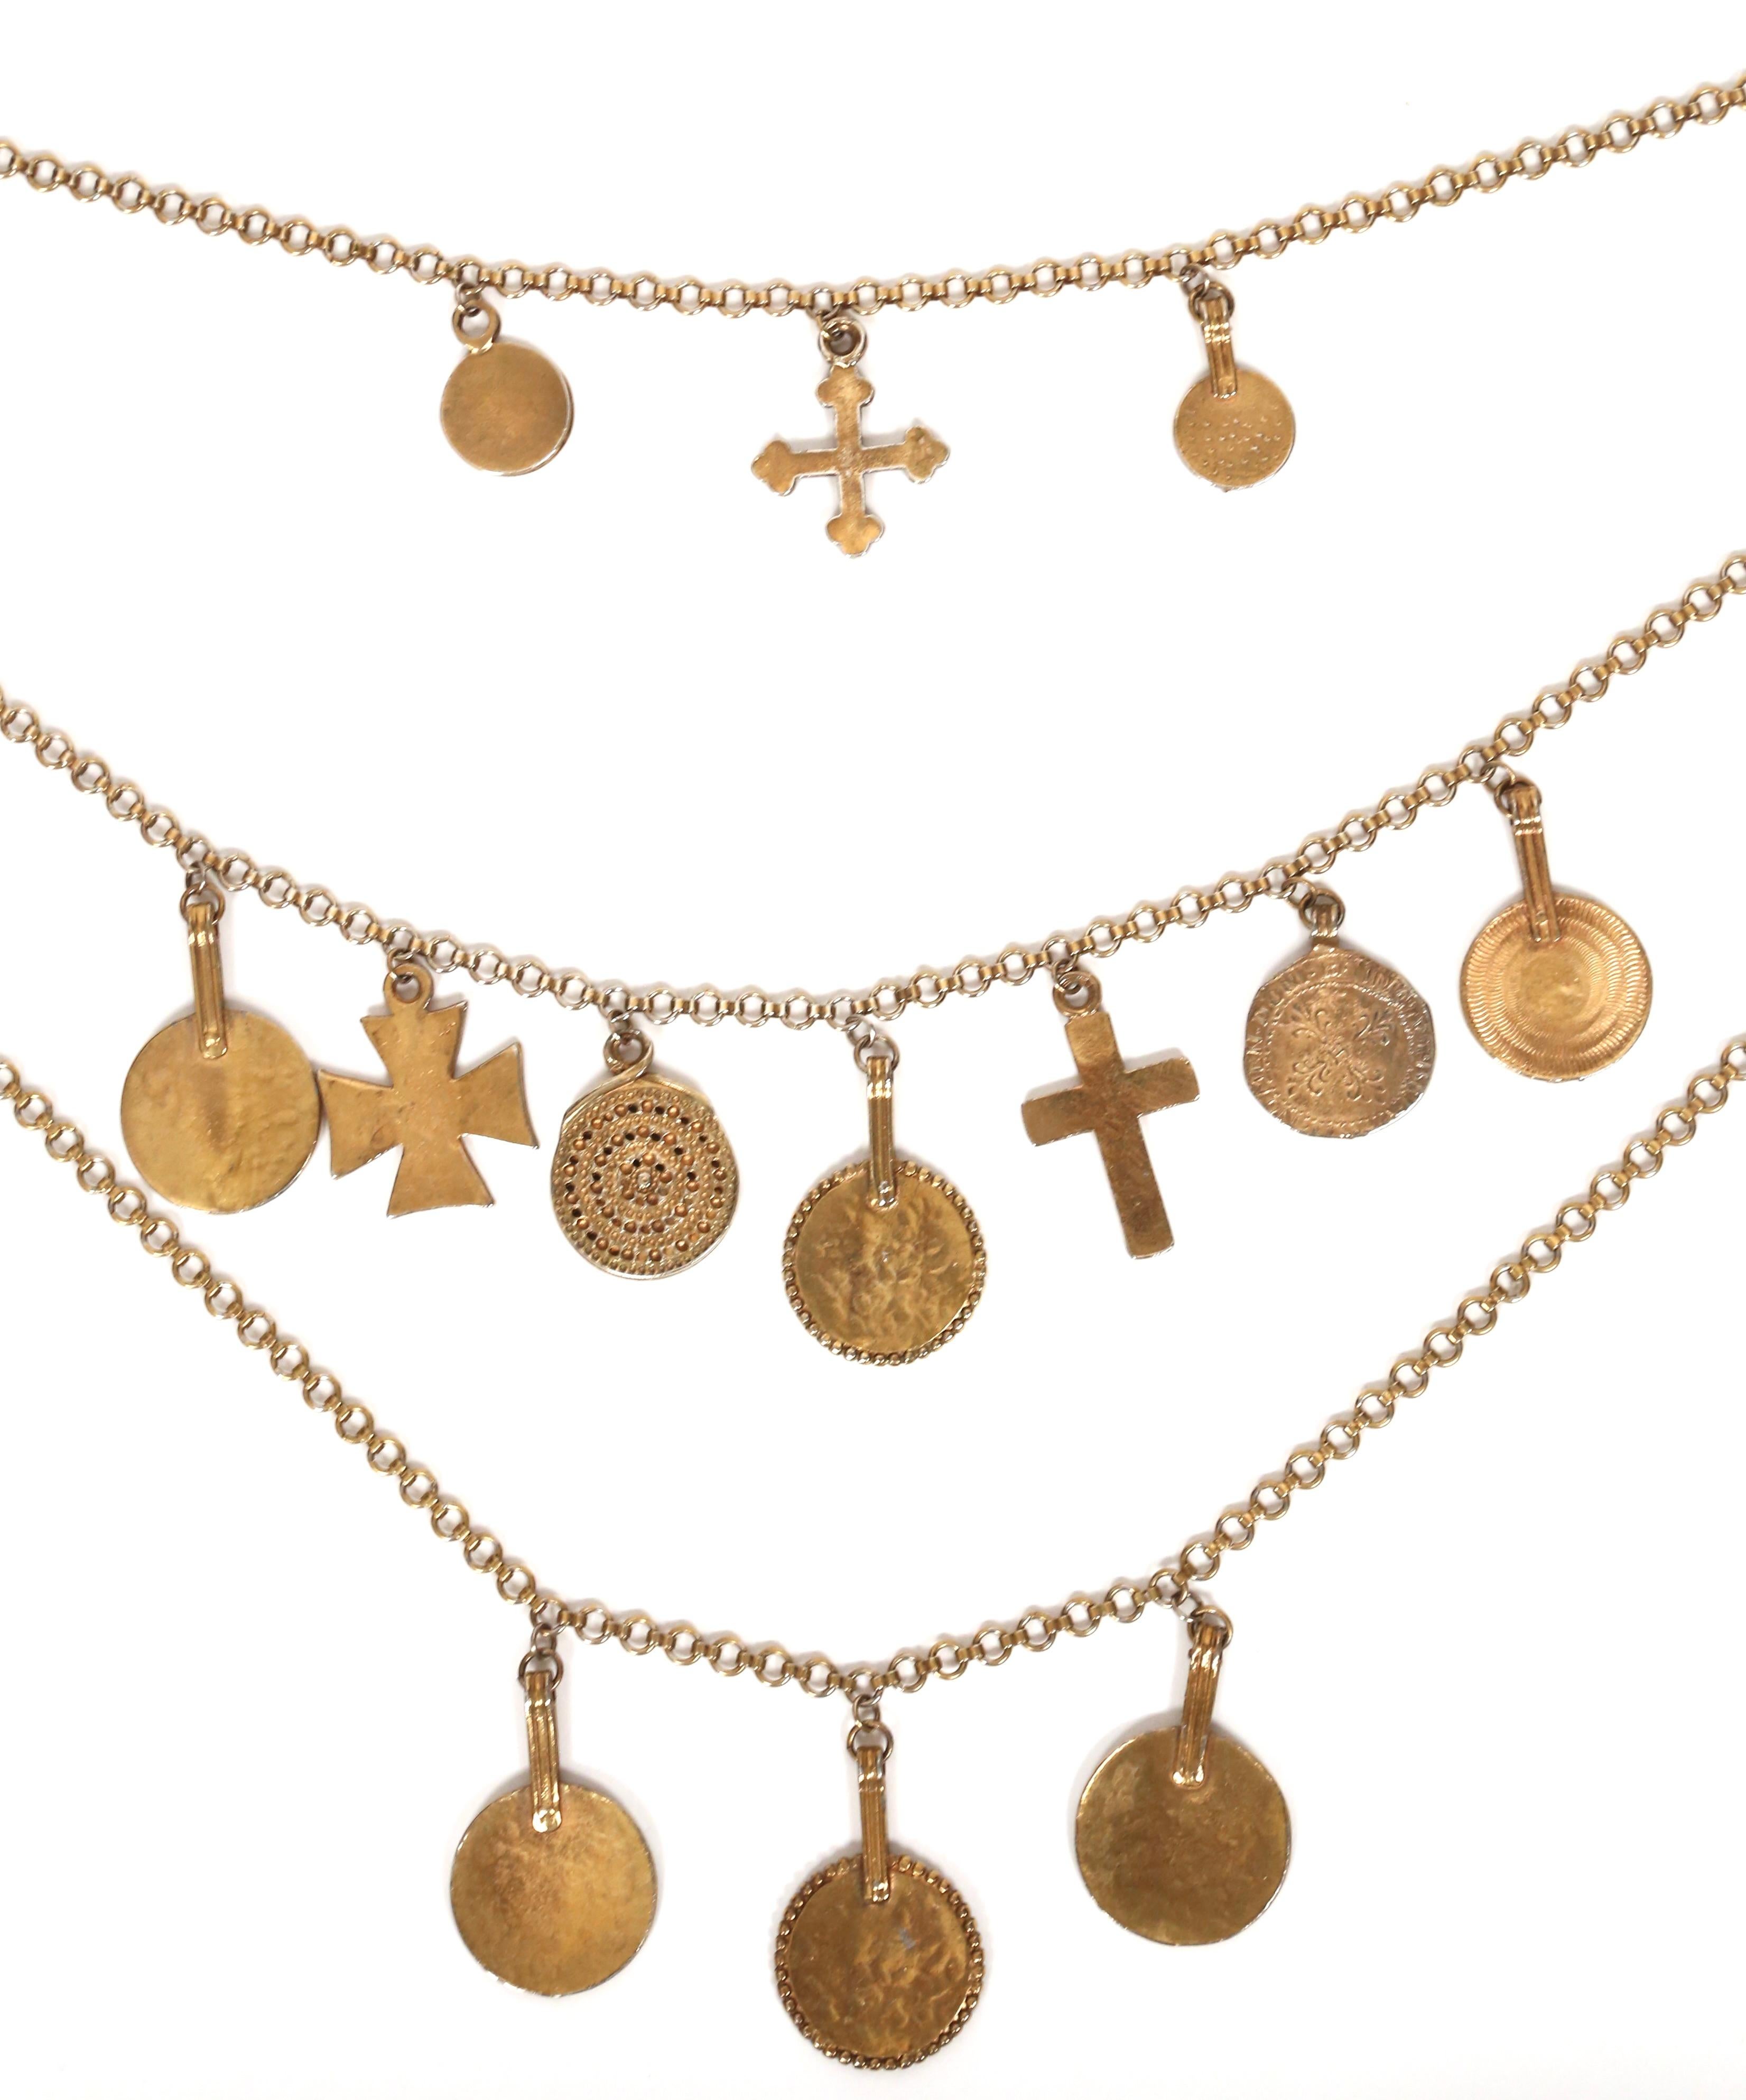 rare 1977 YVES SAINT LAURENT gilt coins and crosses charm necklace For Sale 4